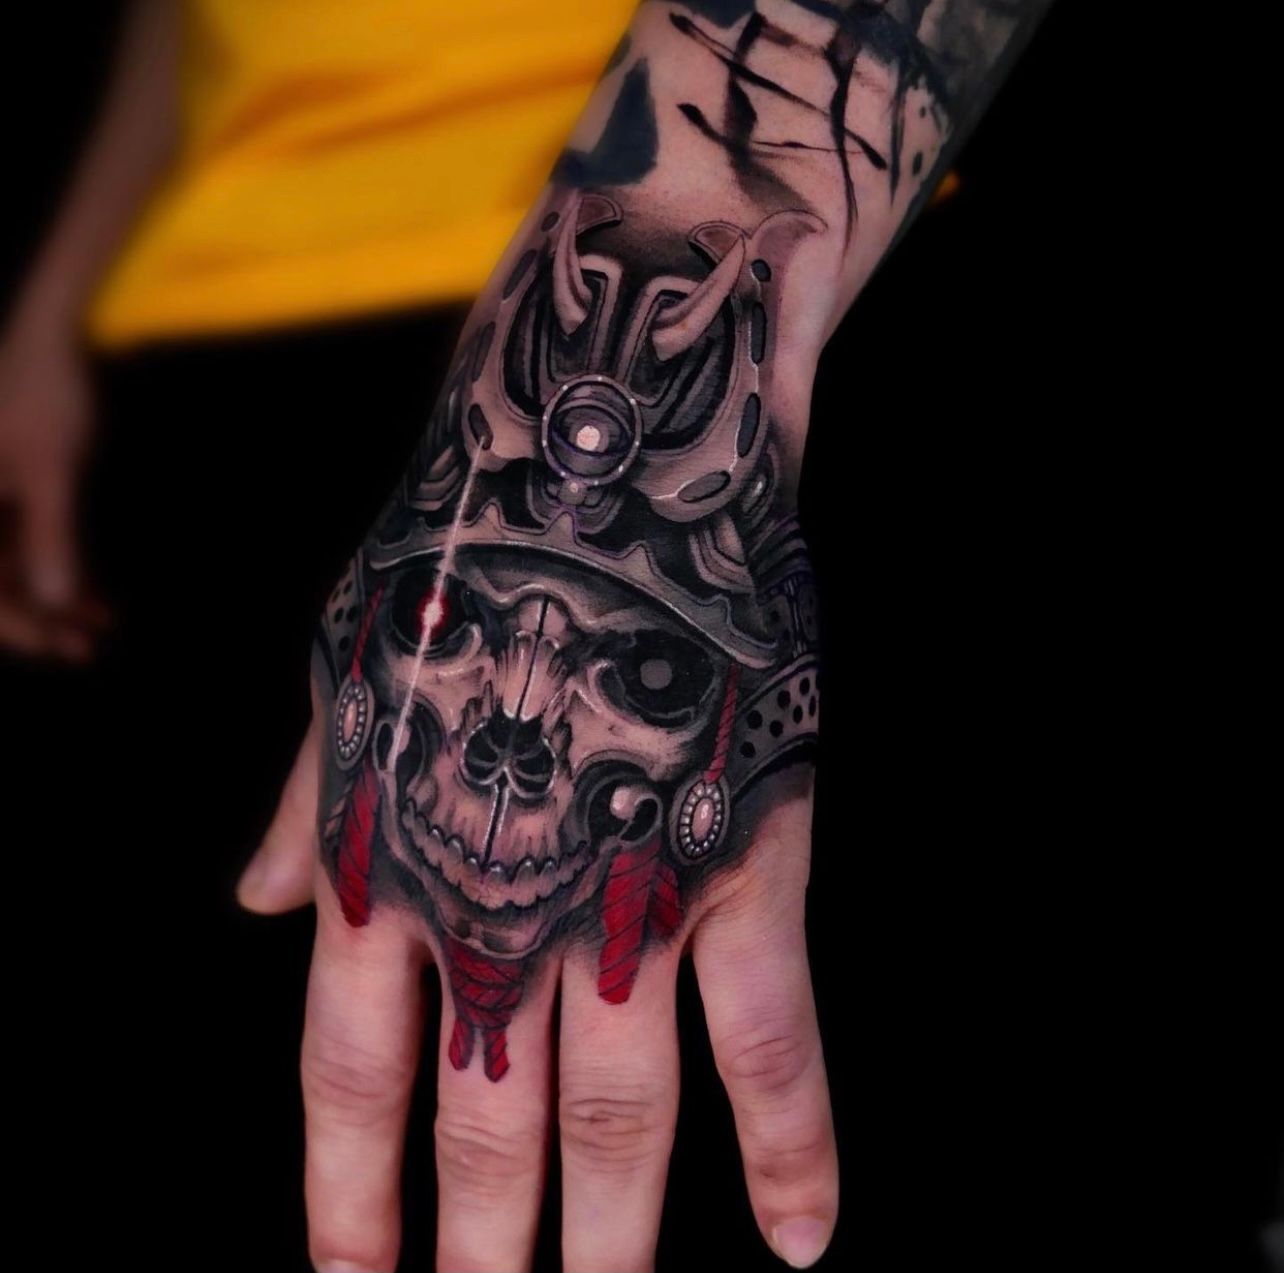 Trash polka style hand tattoo with Japanese imagery This is all concept  some things here may not stay  rTattooDesigns